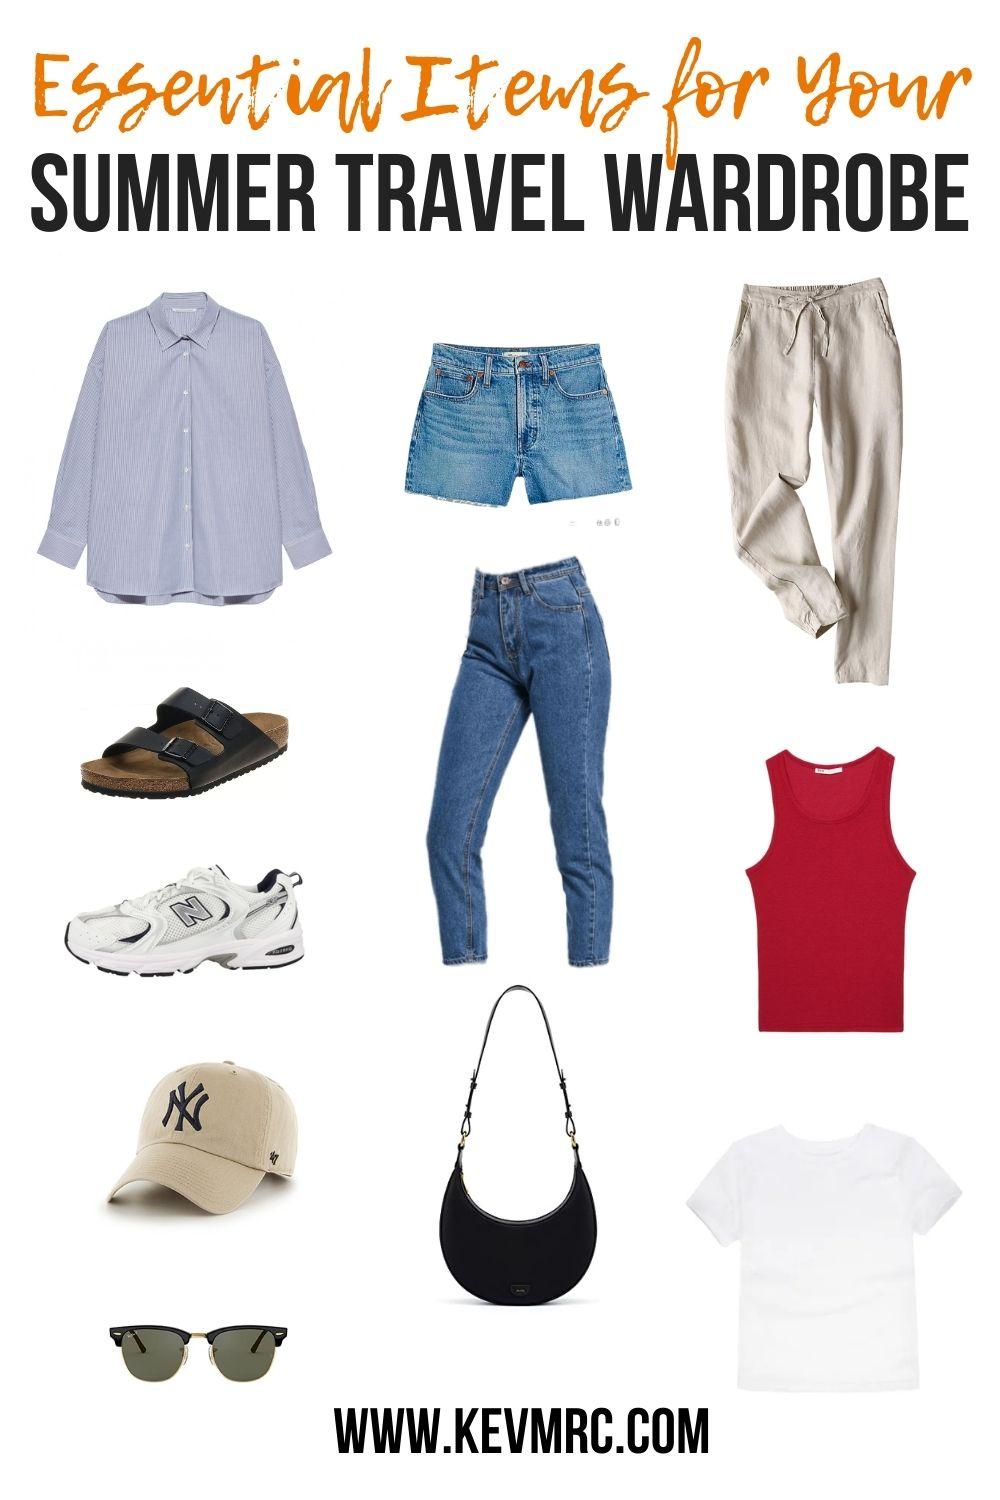 Don't know where to start to make your own summer travel capsule wardrobe? To help you achieve this, I've made a guide listing the basic items you need to do it, while avoiding overpacking. Check them out! summer travel wardrobe | summer travel outfit women | summer travel outfit ideas | summer travel capsule wardrobe minimalist